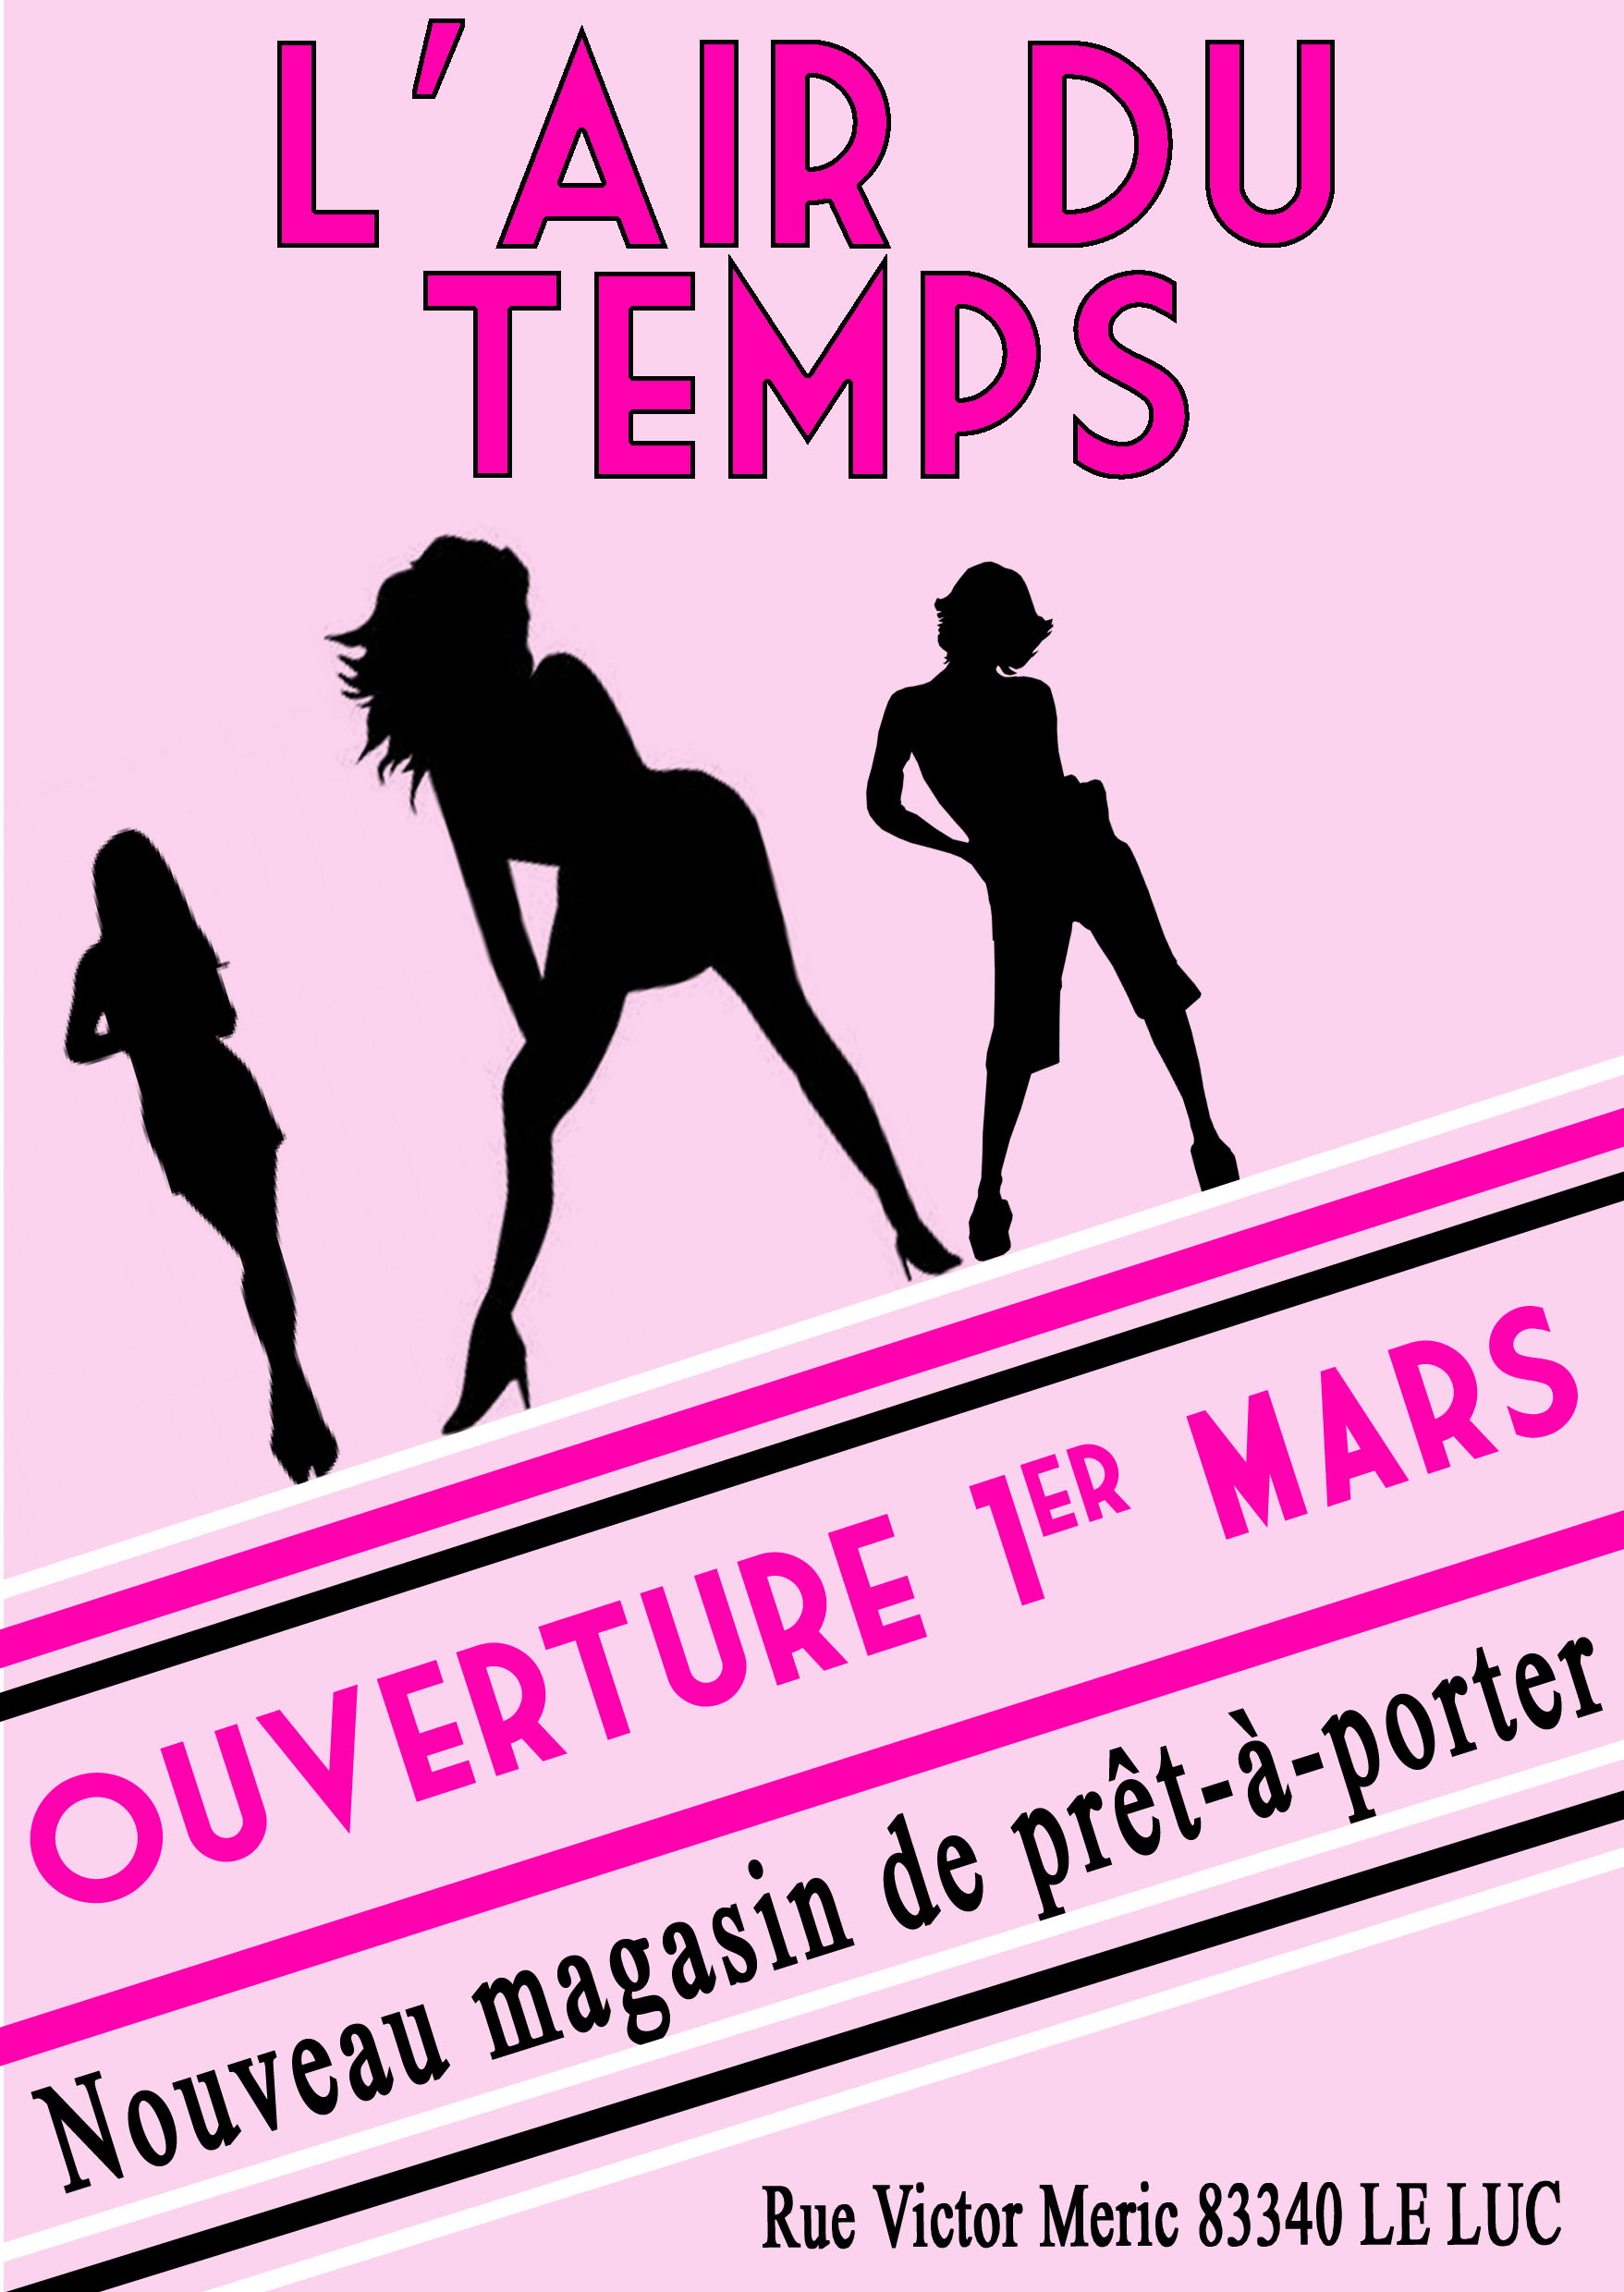 flyers ouverture magasin